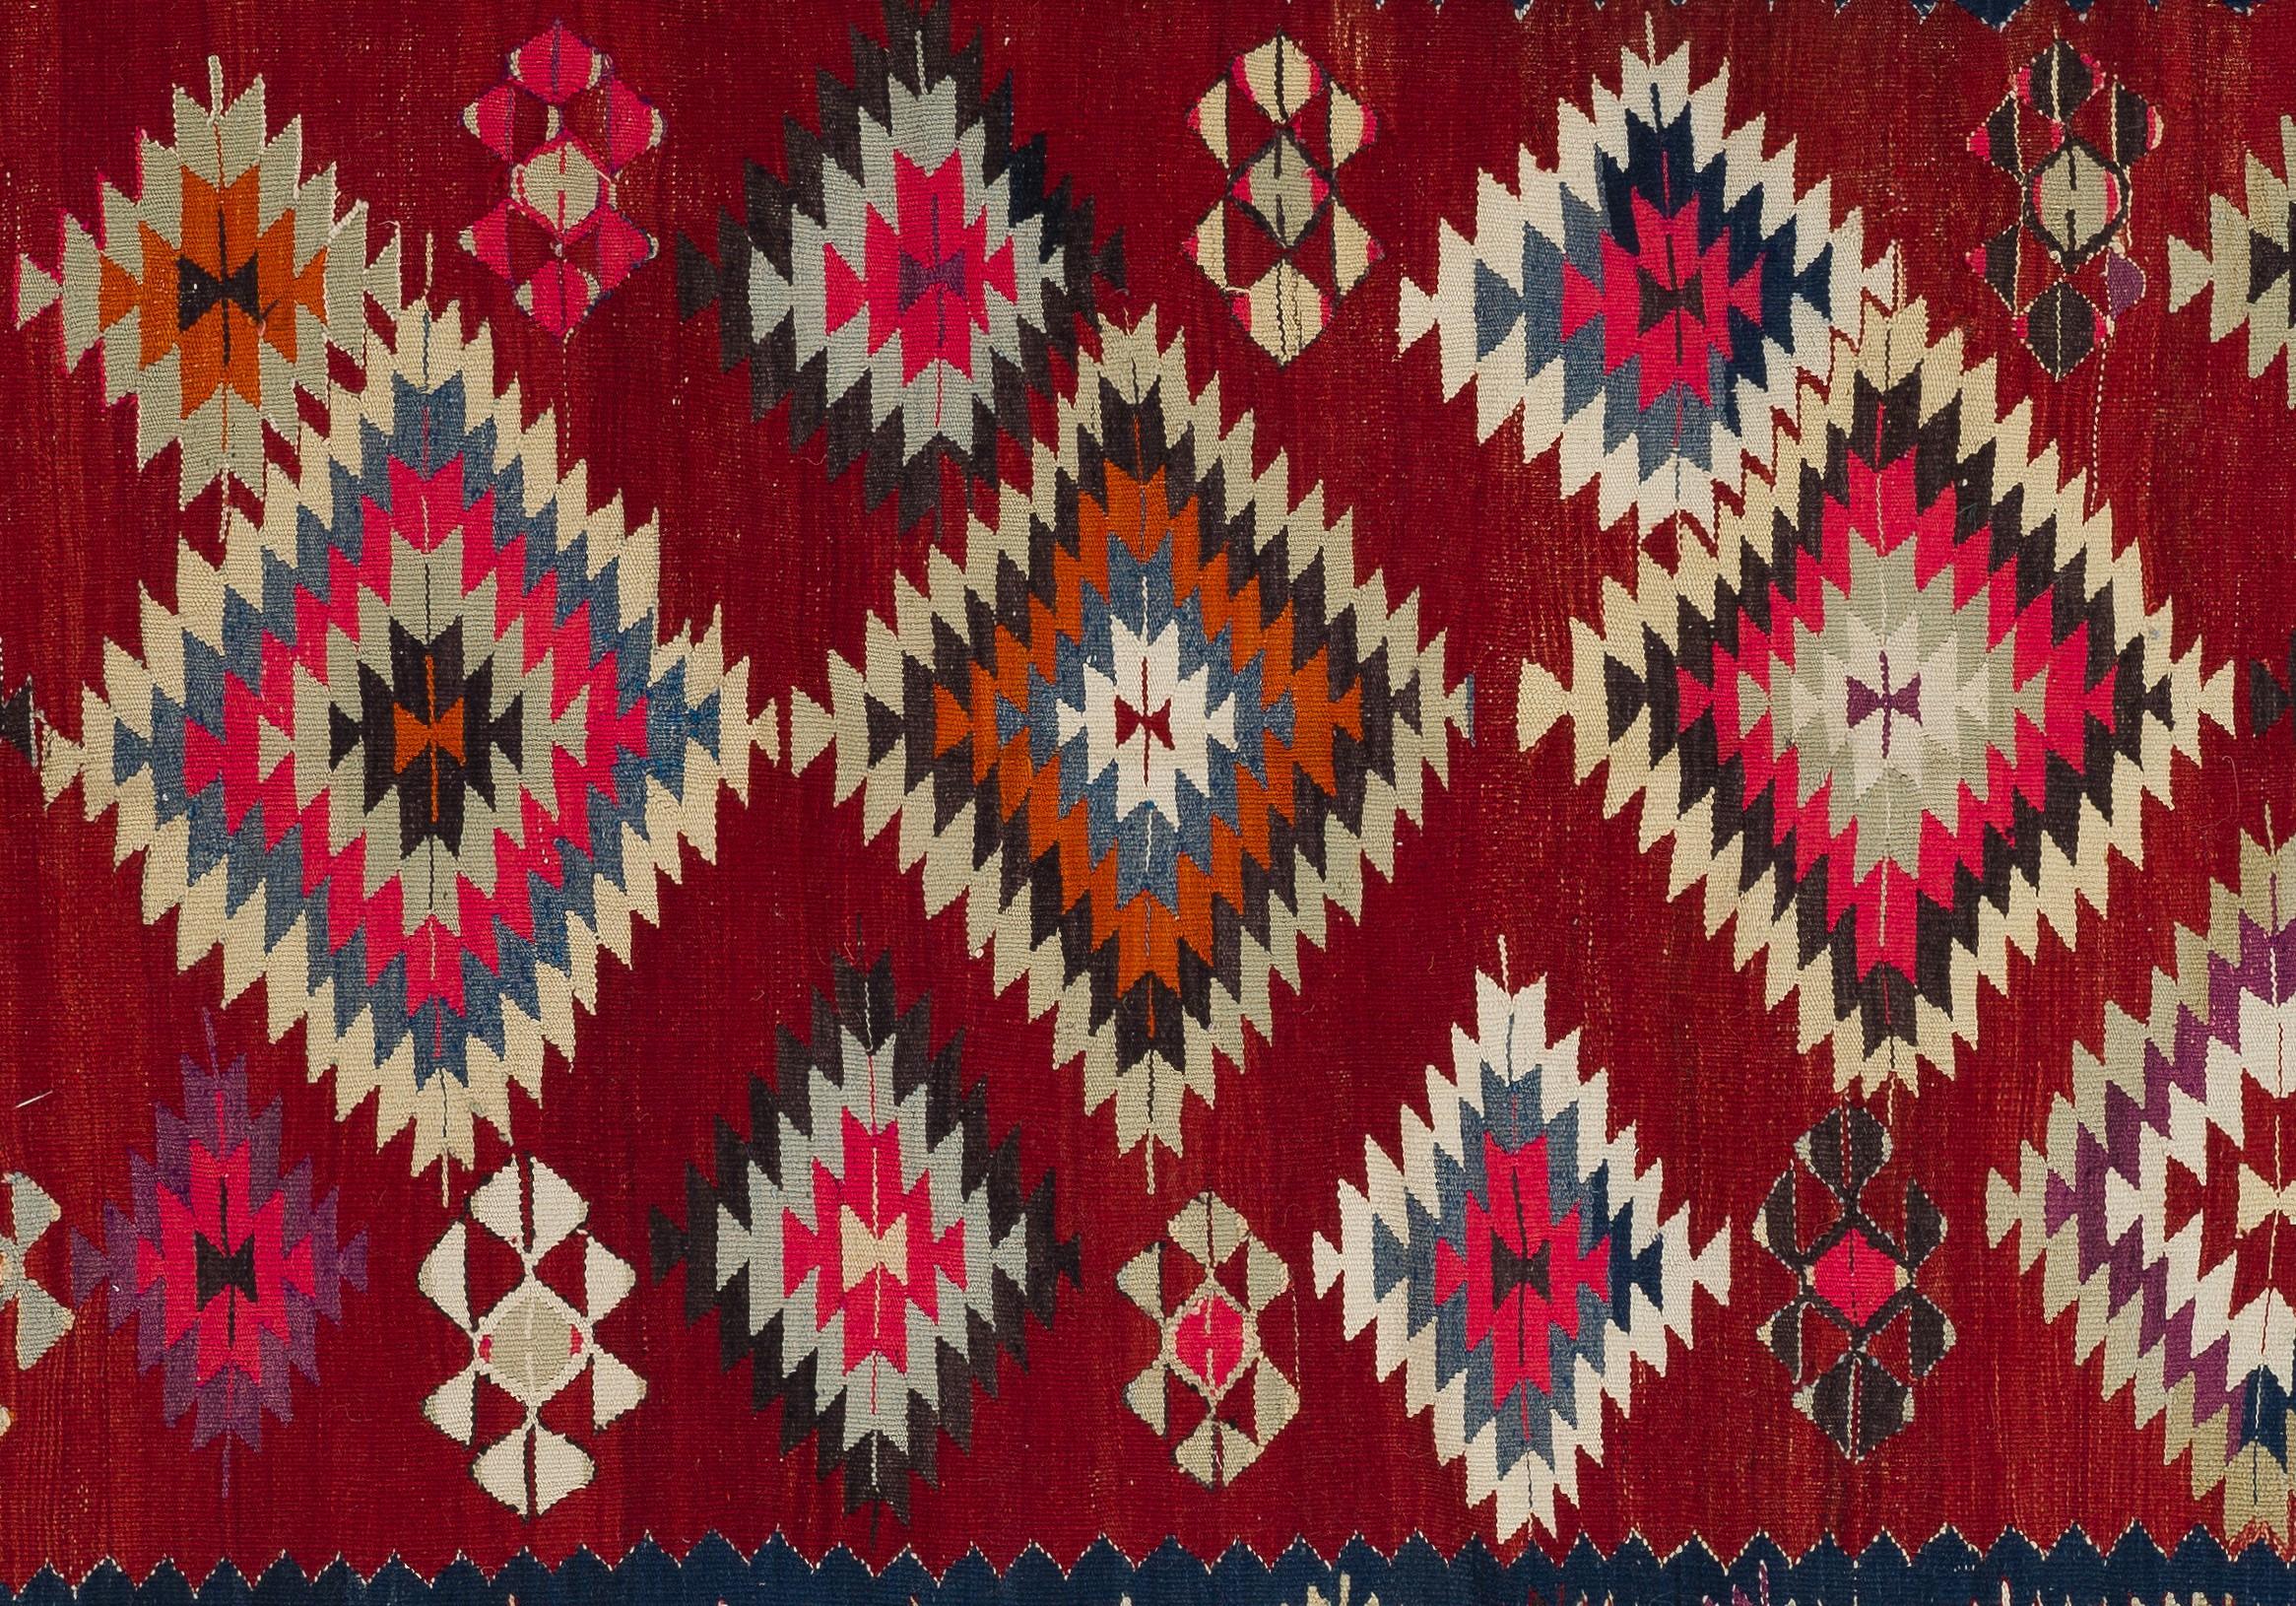 5.4x8.5 ft Hand Woven Turkish Kilim Rug with Geometric Design in Red and Indigo In Good Condition For Sale In Philadelphia, PA